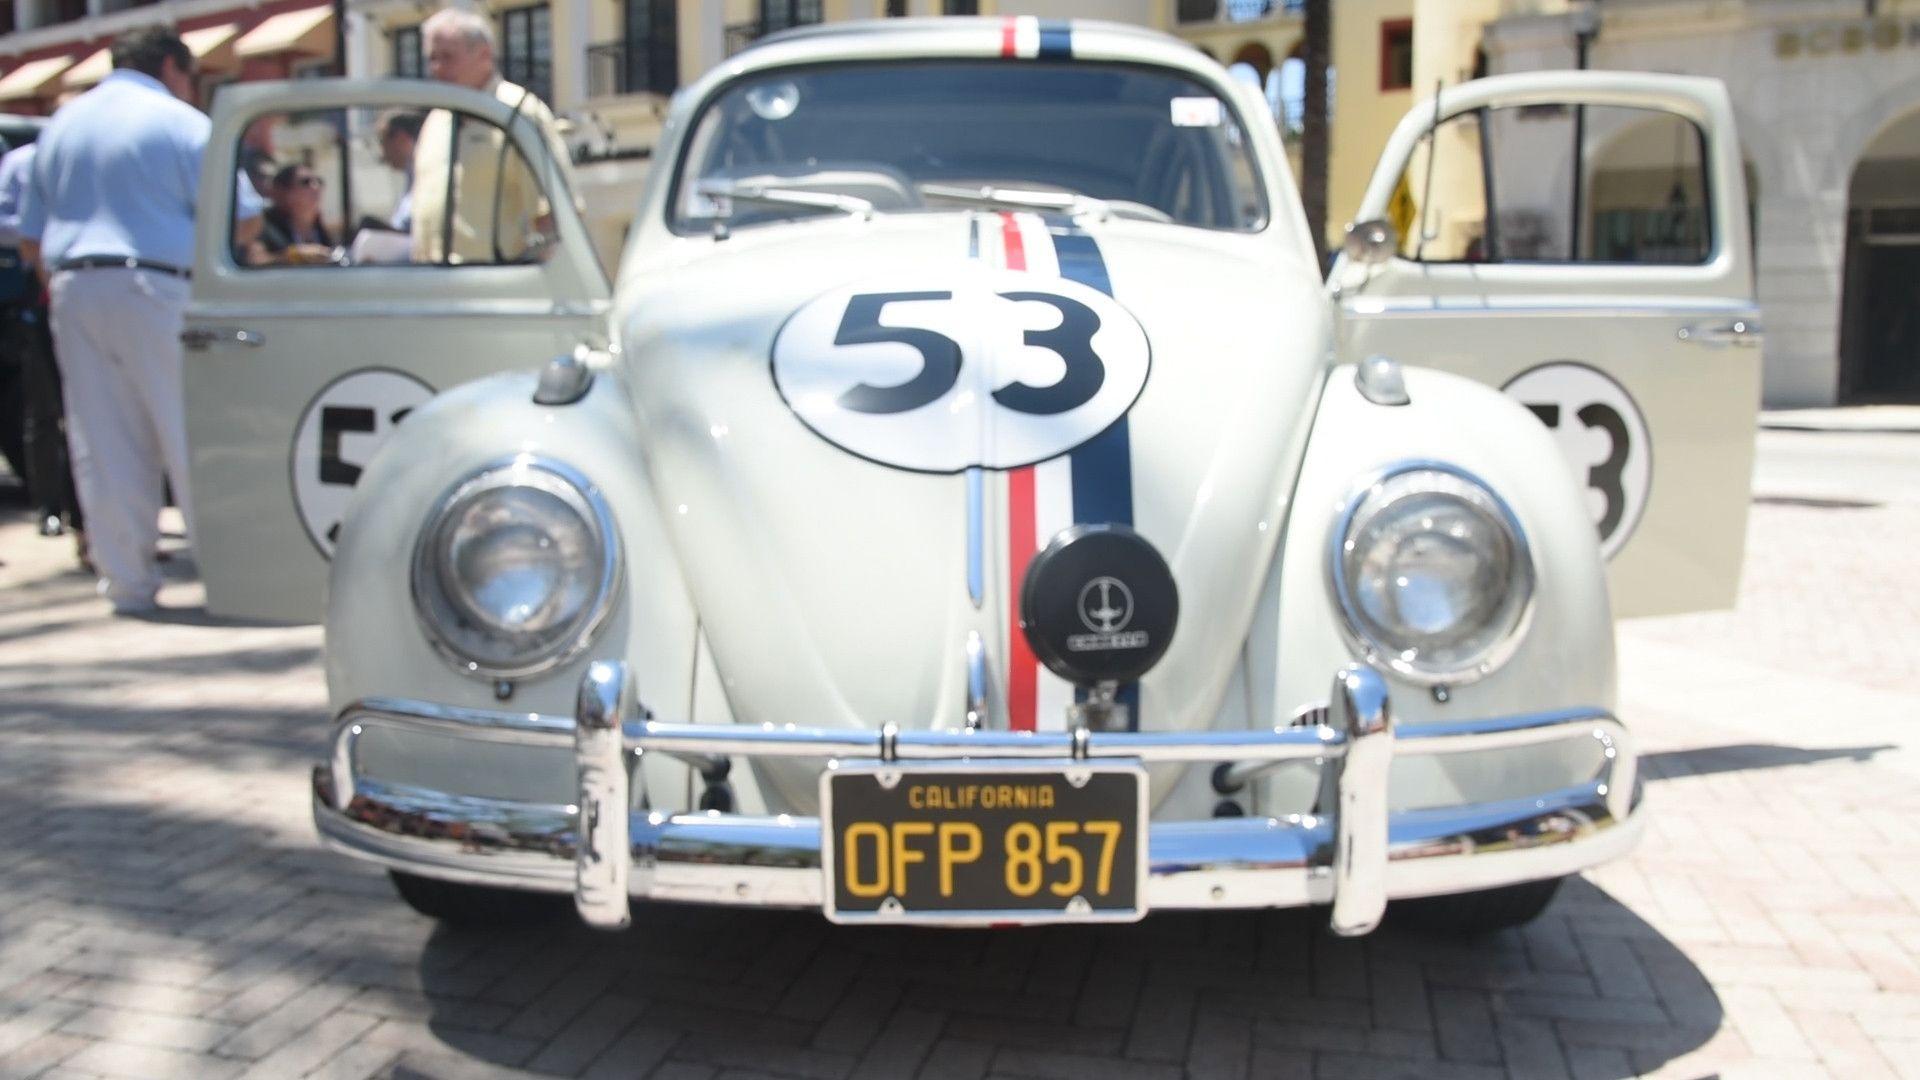 Herbie the love bug get's featured in car auction